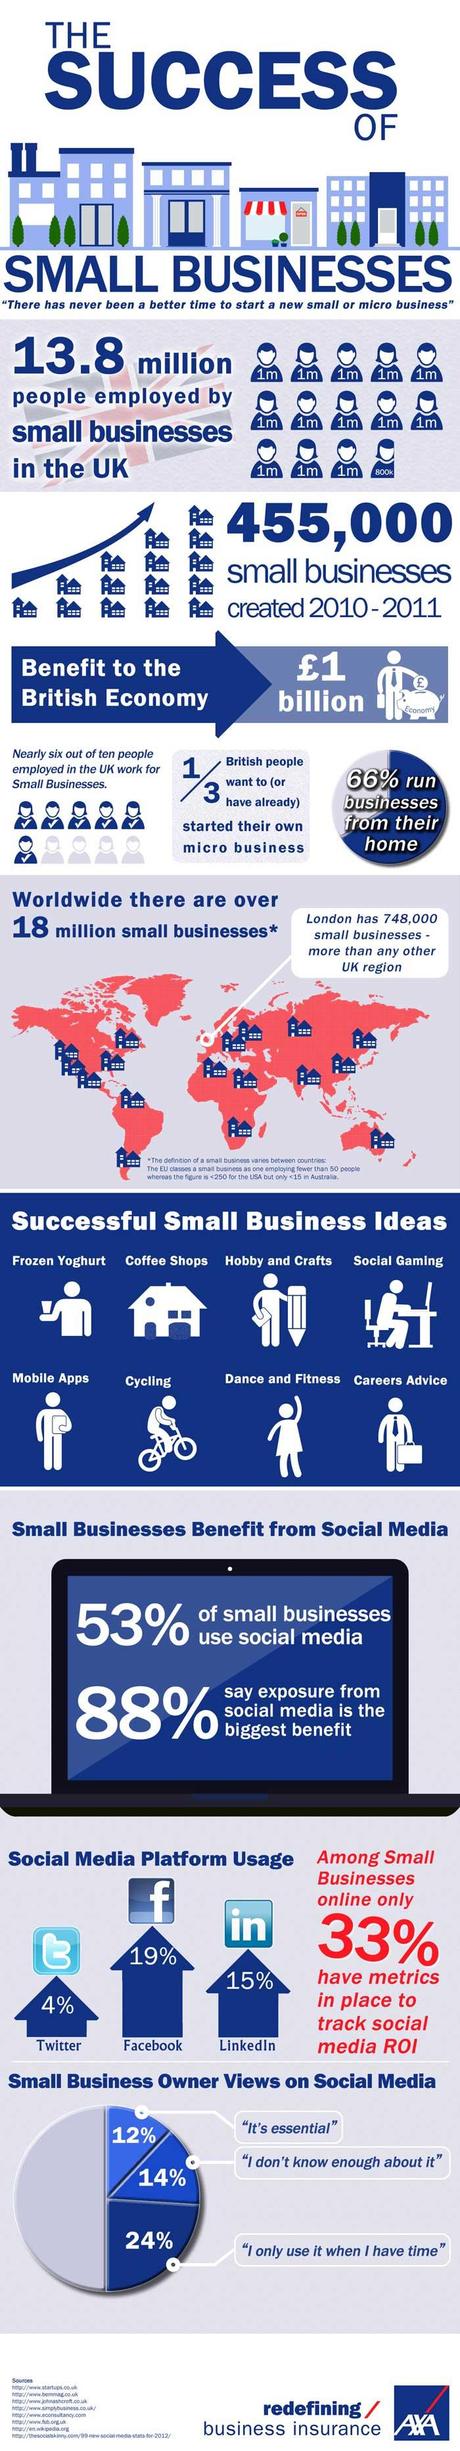 Success of Small Businesses in the UK Infographic